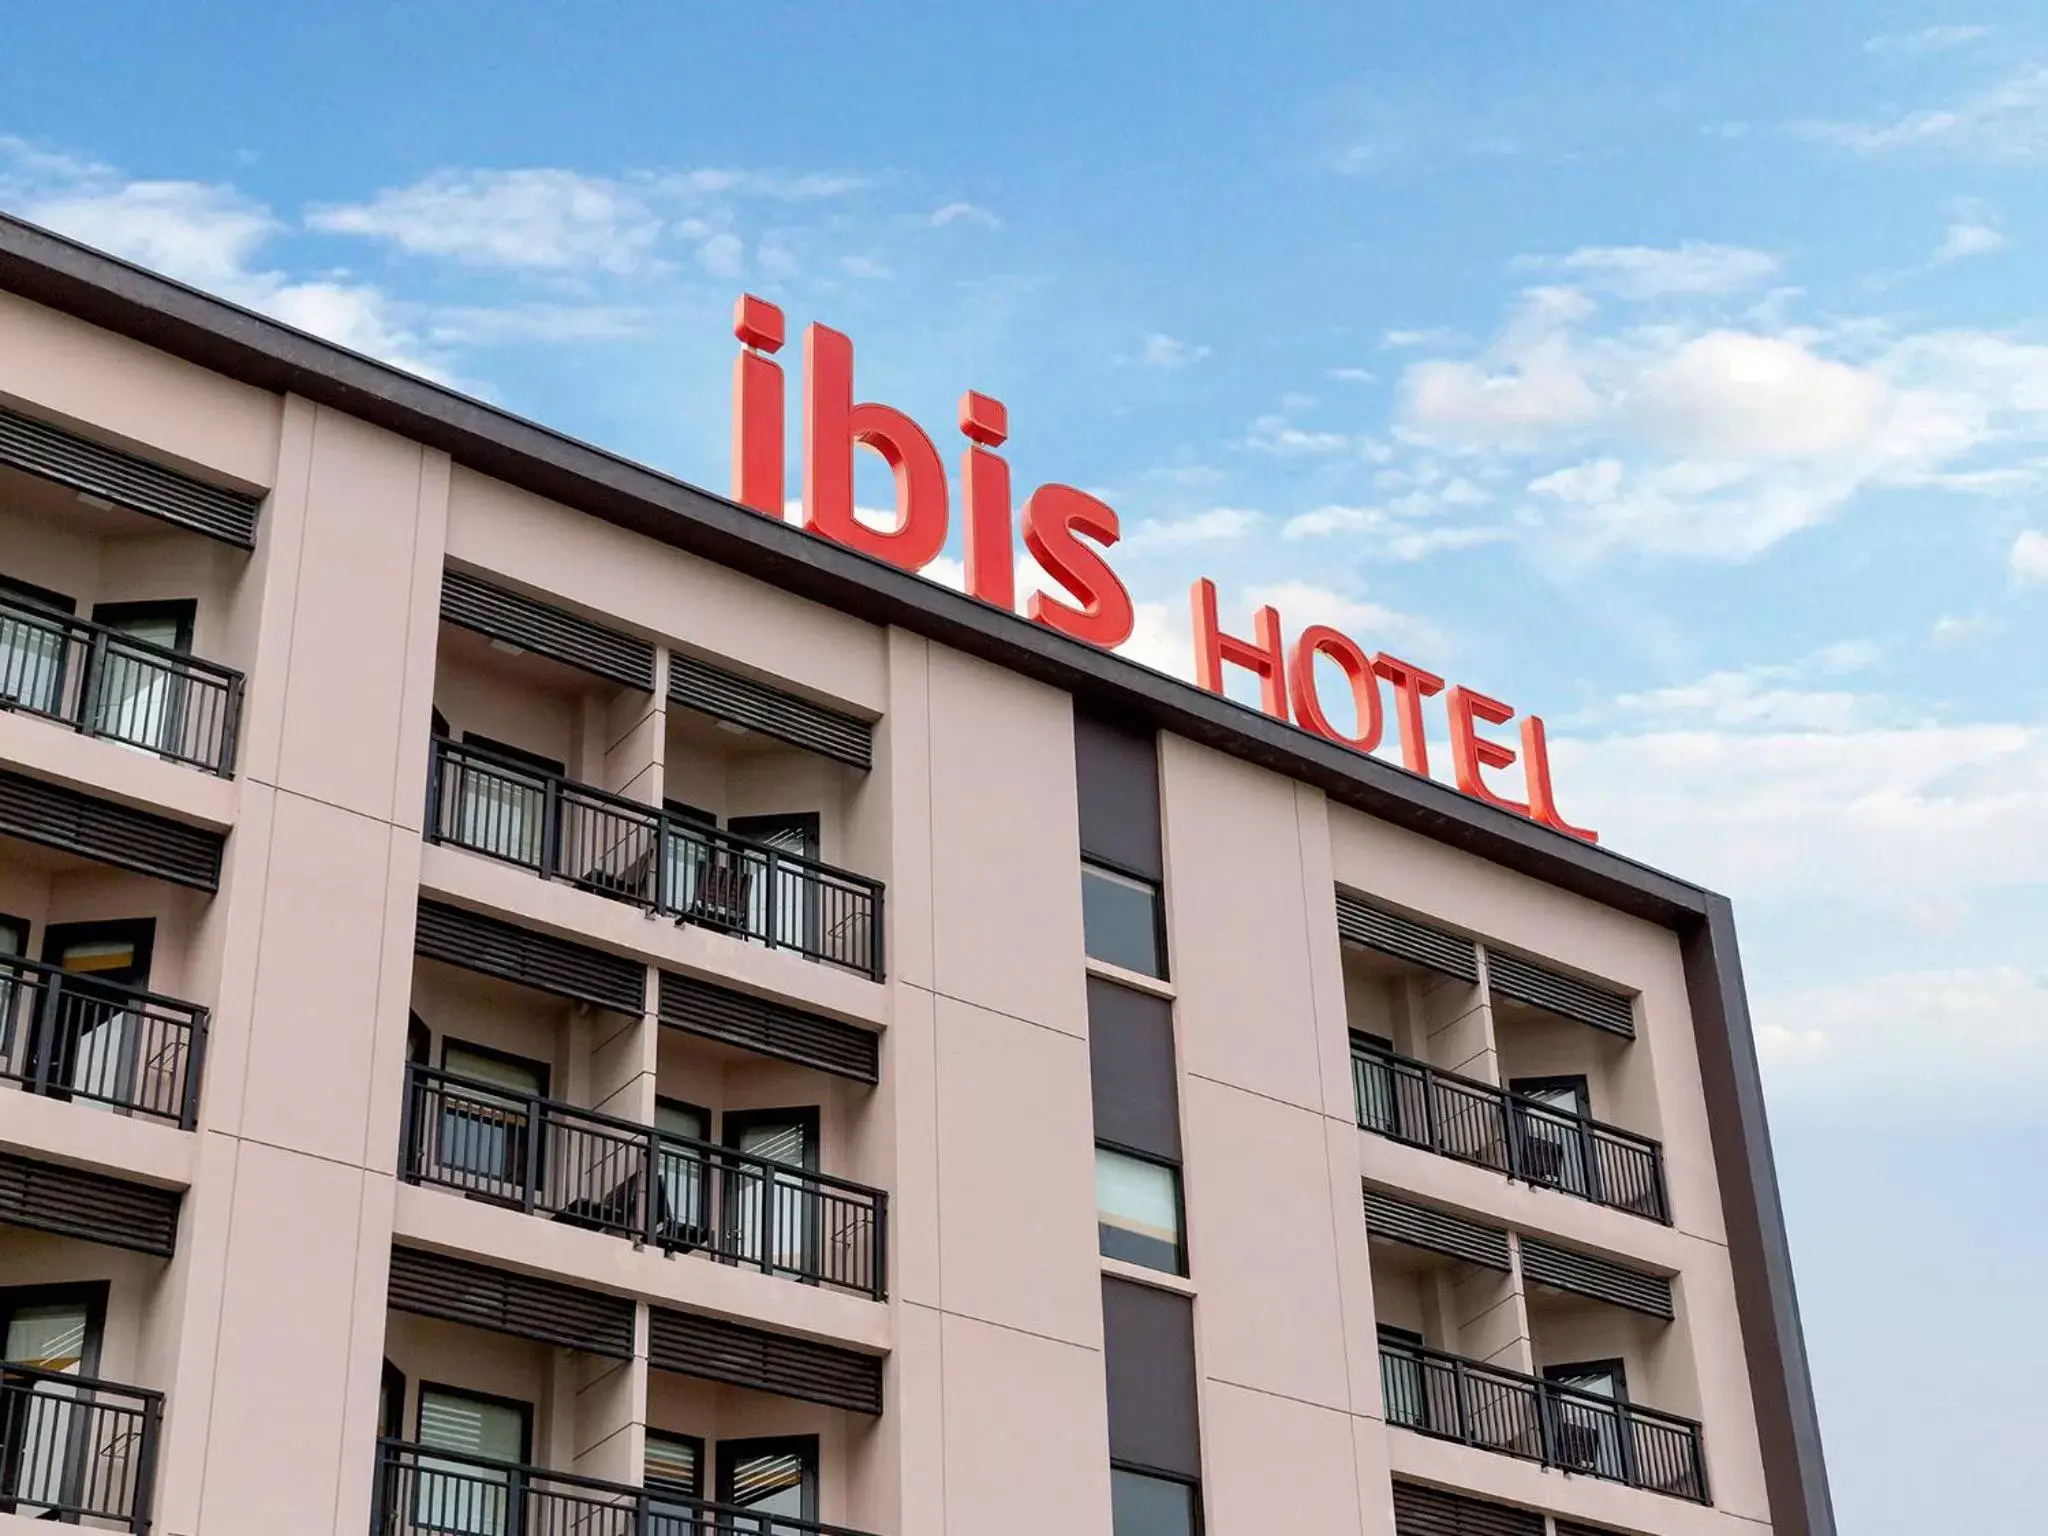 Property logo or sign, Property Building in Ibis Hua Hin